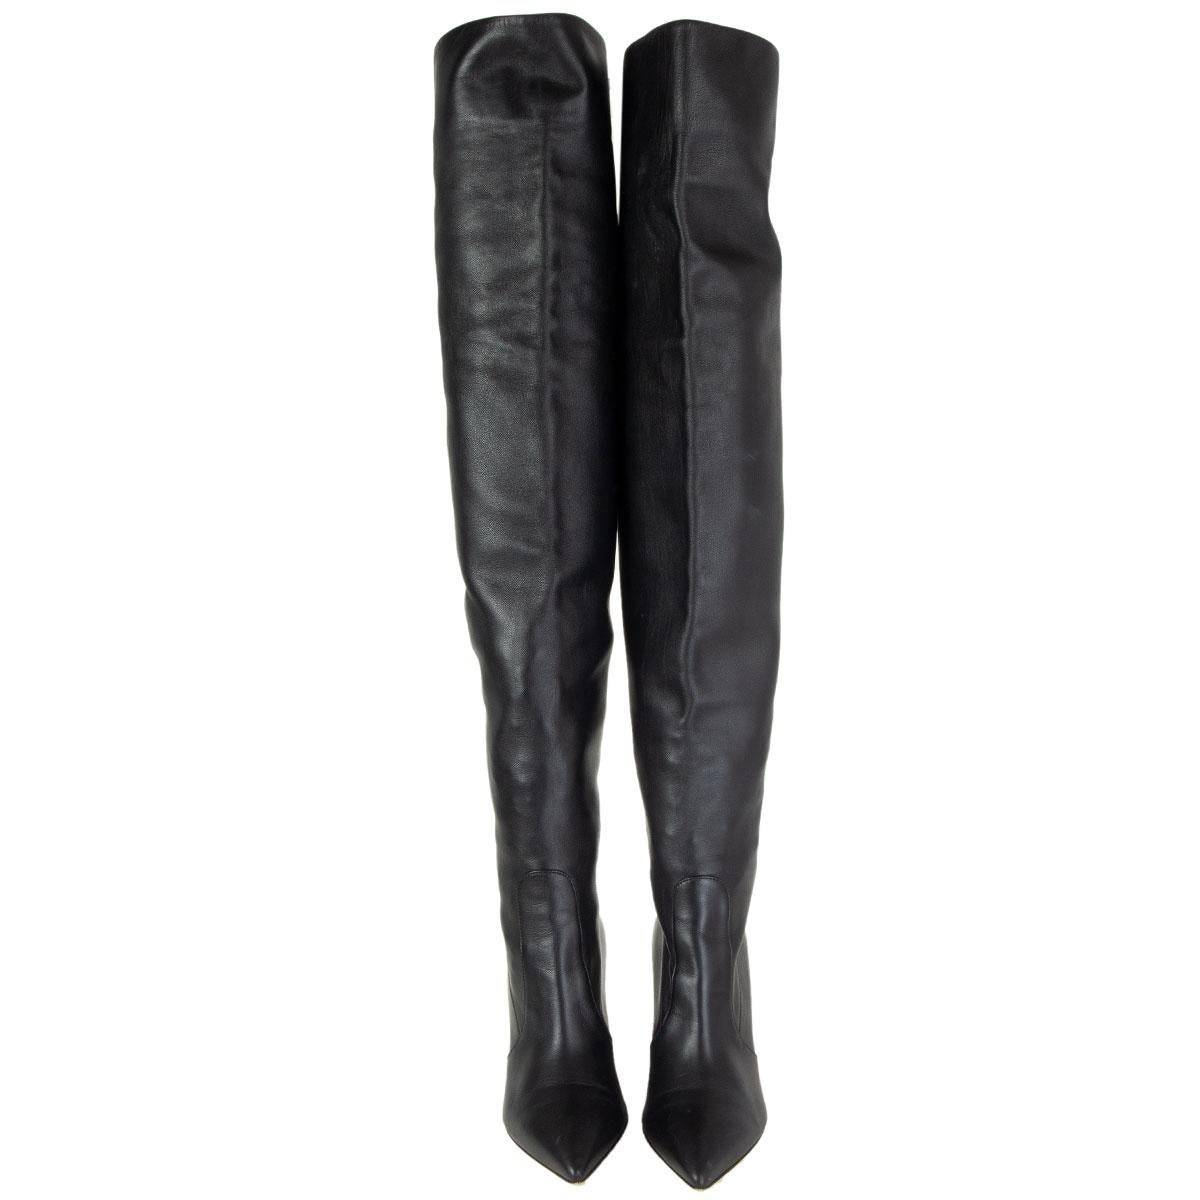 Gianvito Rossi pointed-toe block-heel over-knee boots in black smooth lambskin. Have been worn and are in excellent condition. 

Imprinted Size 38
Shoe Size 38
Inside Sole 25cm (9.8in)
Width 7.5cm (2.9in)
Heel 8.5cm (3.3in)
Shaft 62cm (24.2in)
Top